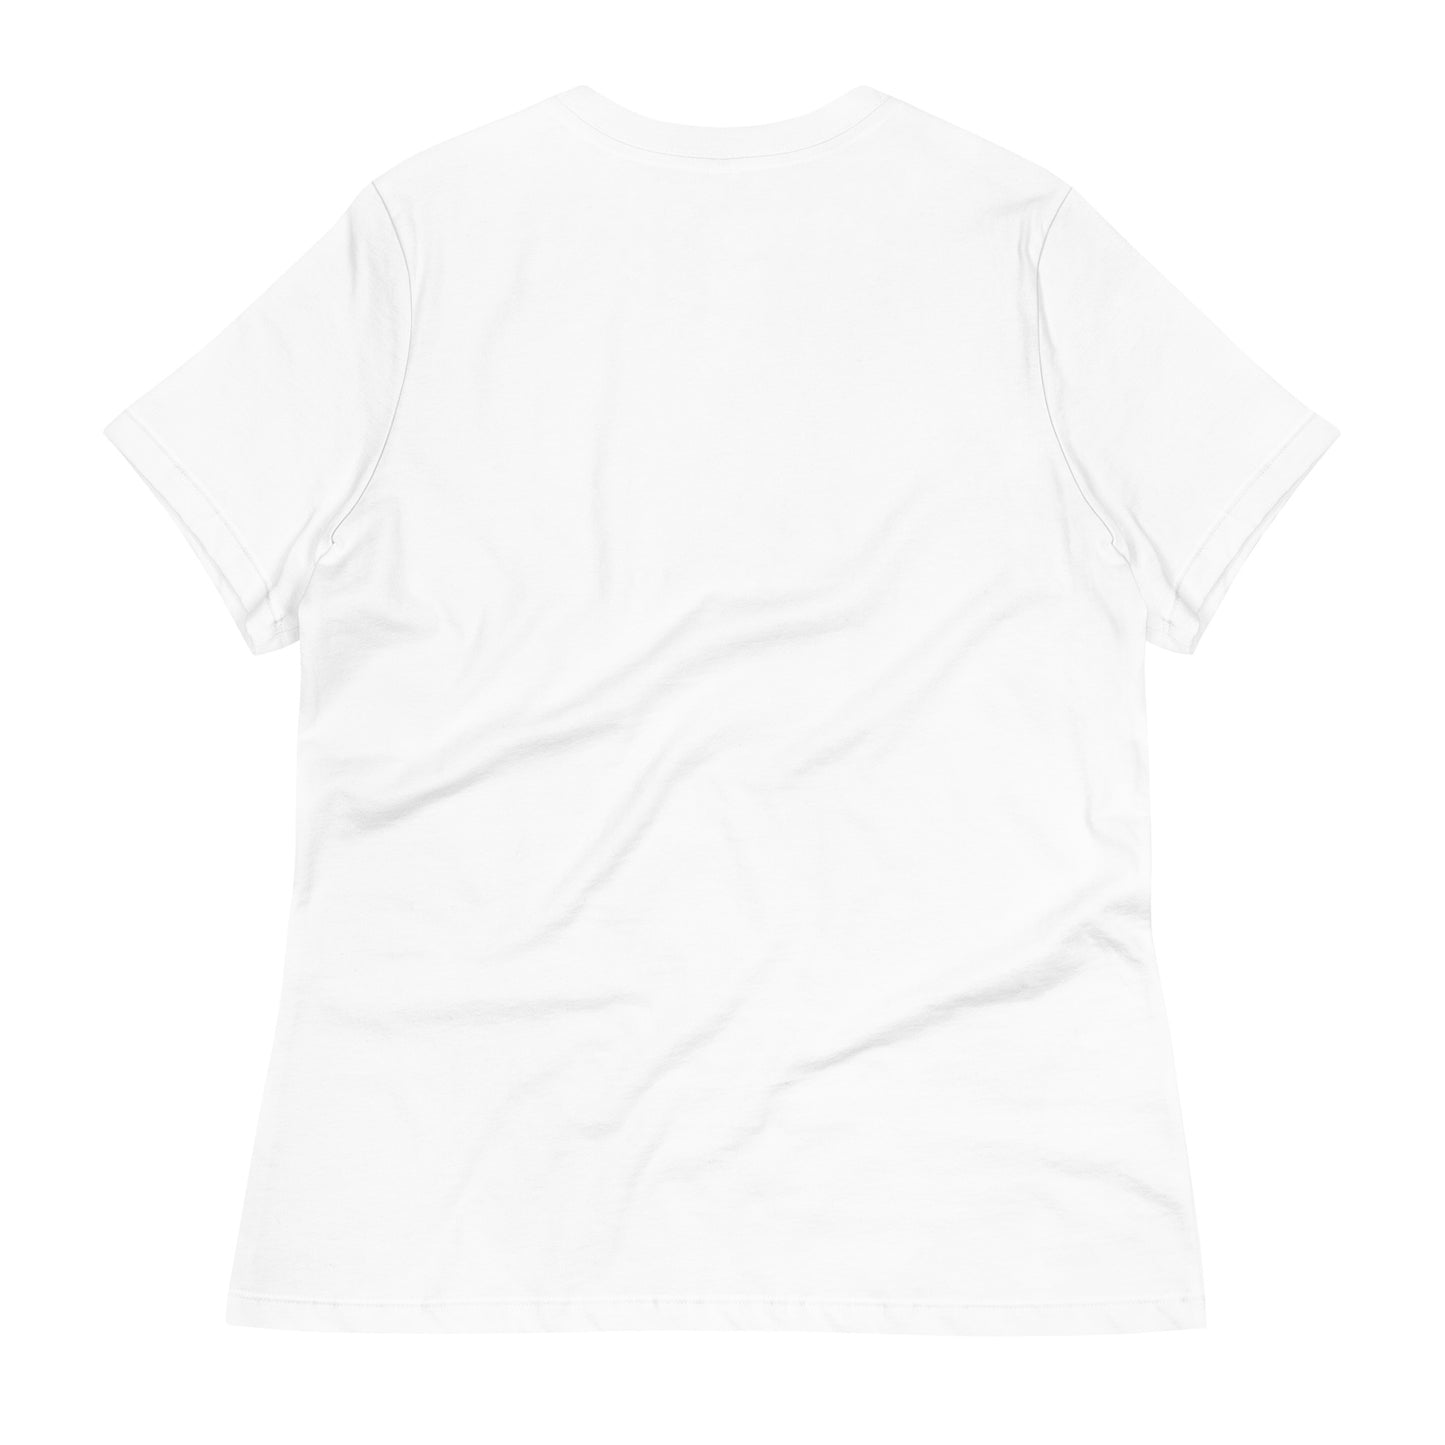 Free Game Women's Relaxed Tee I